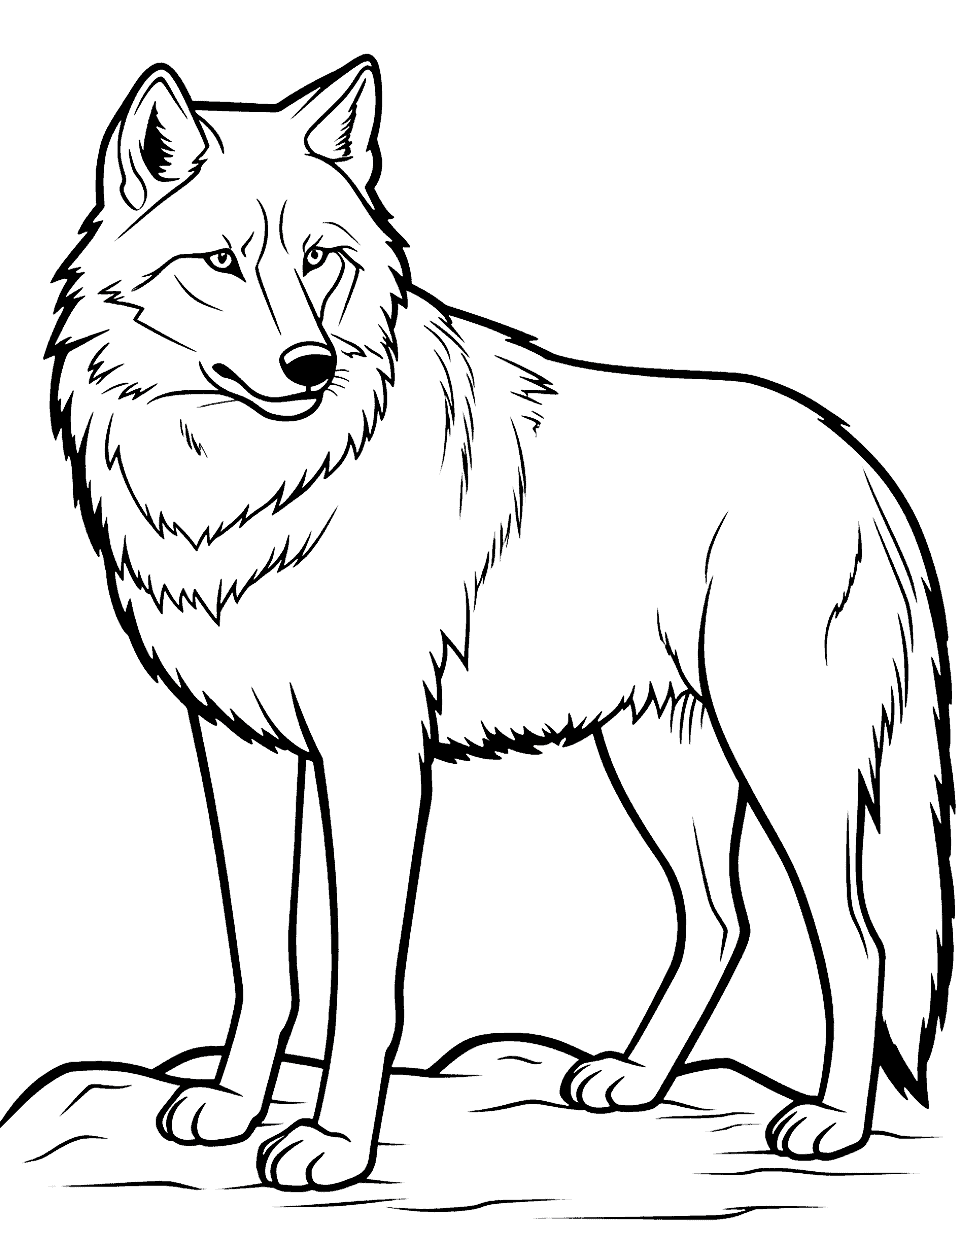 Realistic Gray Wolf Coloring Page - A detailed portrayal of a gray wolf in its natural habitat, with a focus on the fur and eyes.